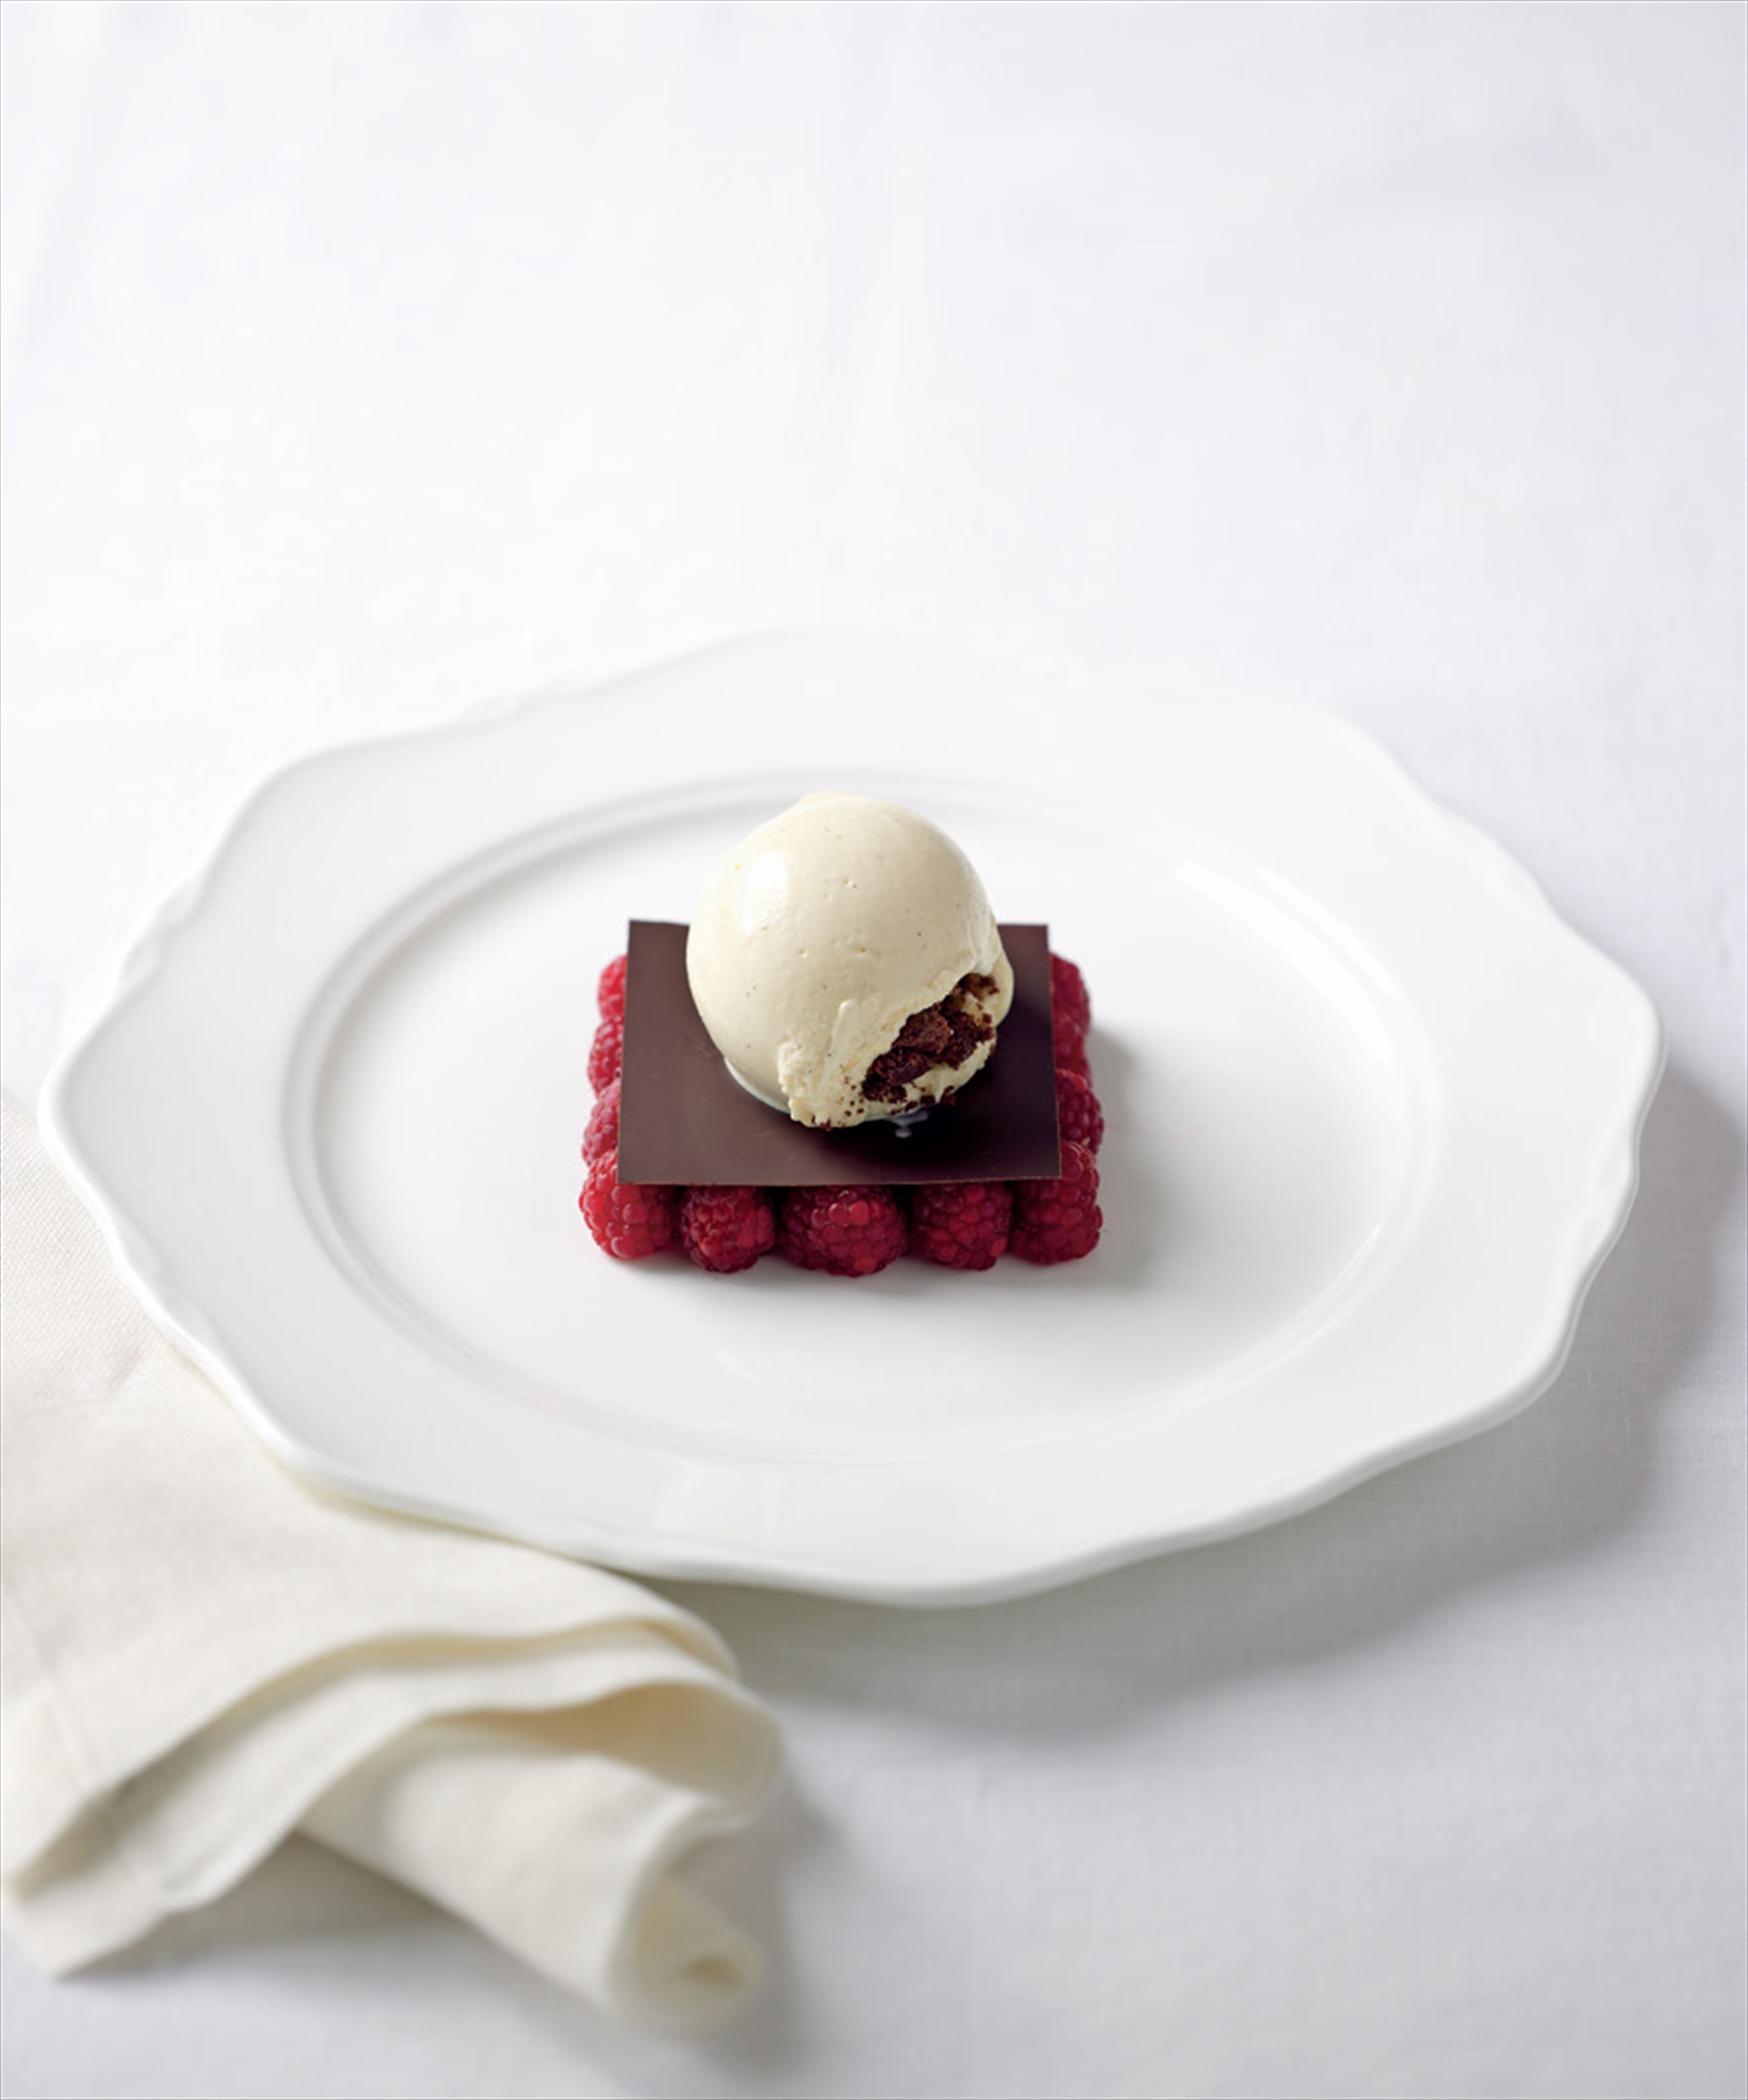 Raspberry and chocolate délice with brownie Ice-cream